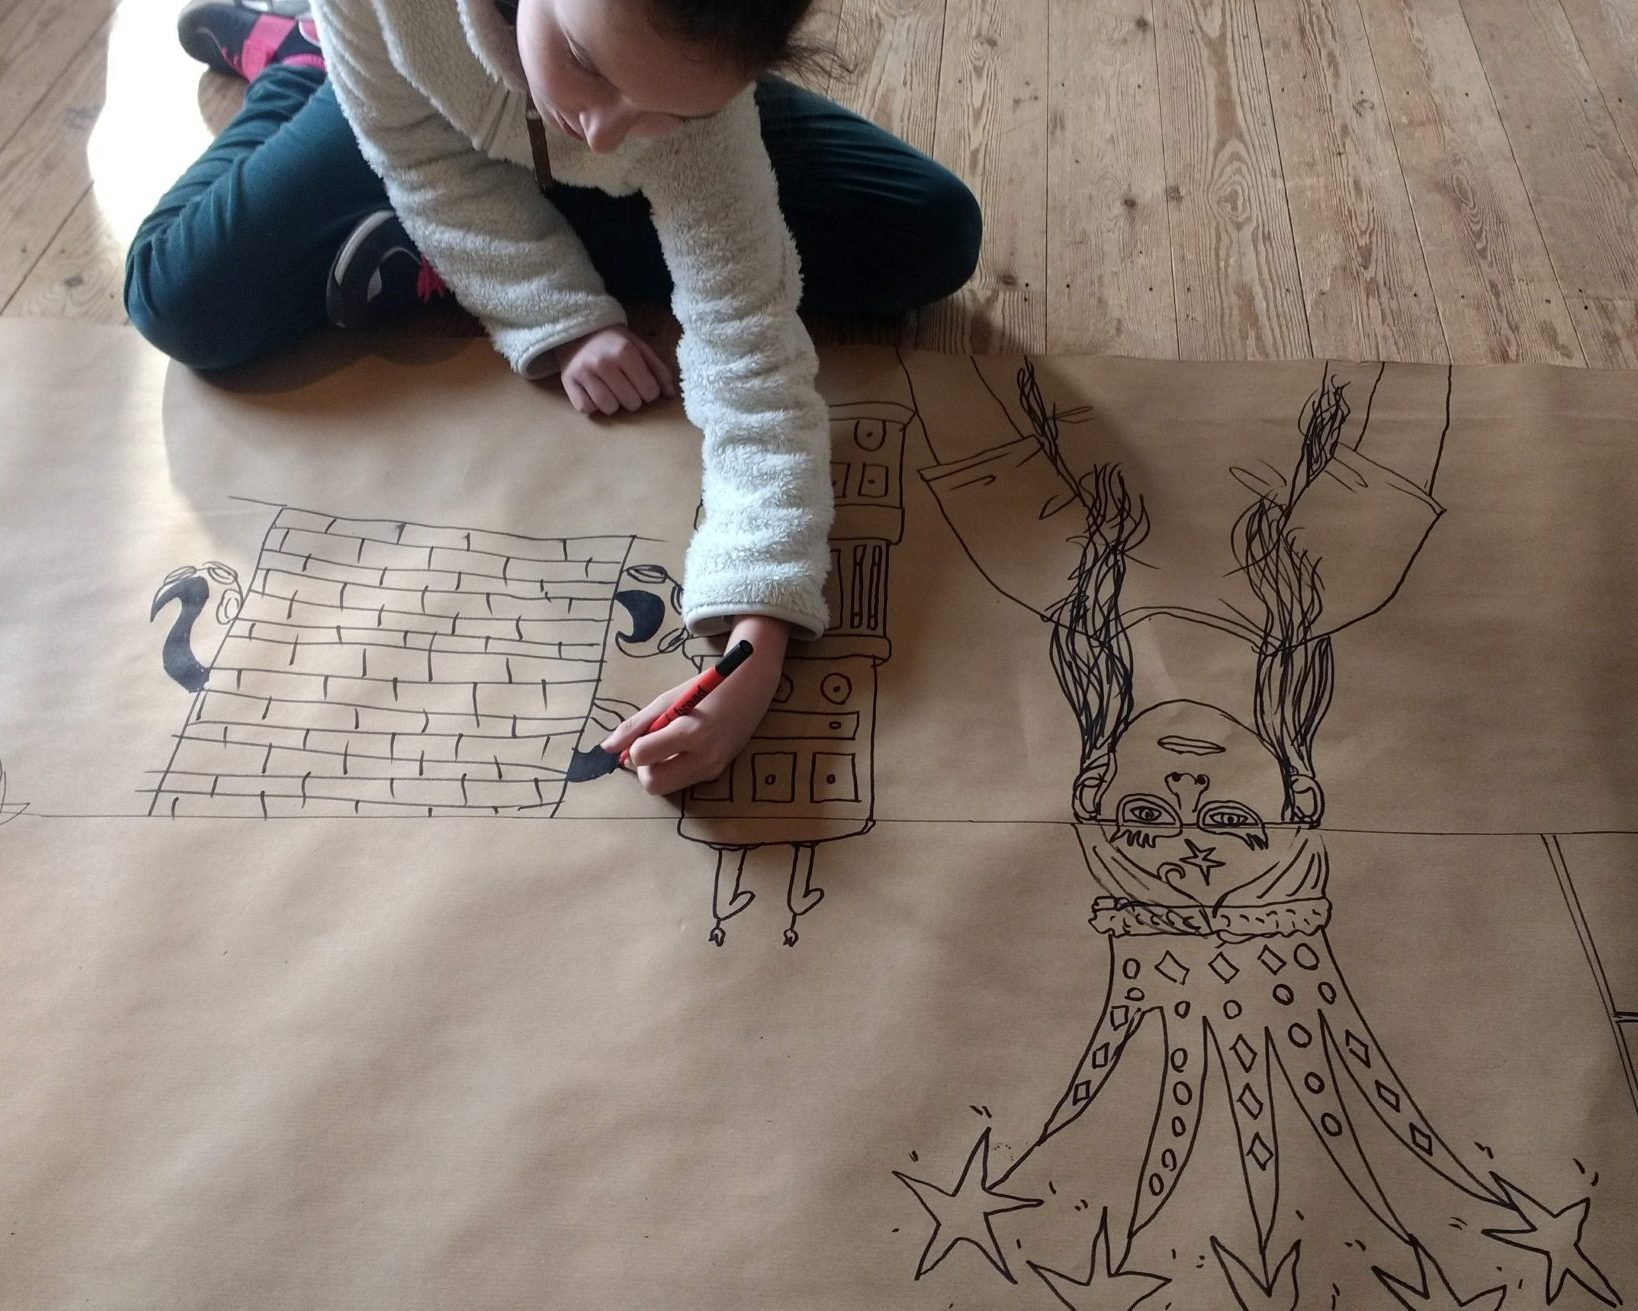 An image of a child drawing on brown paper while sat cross-legged on the floor.